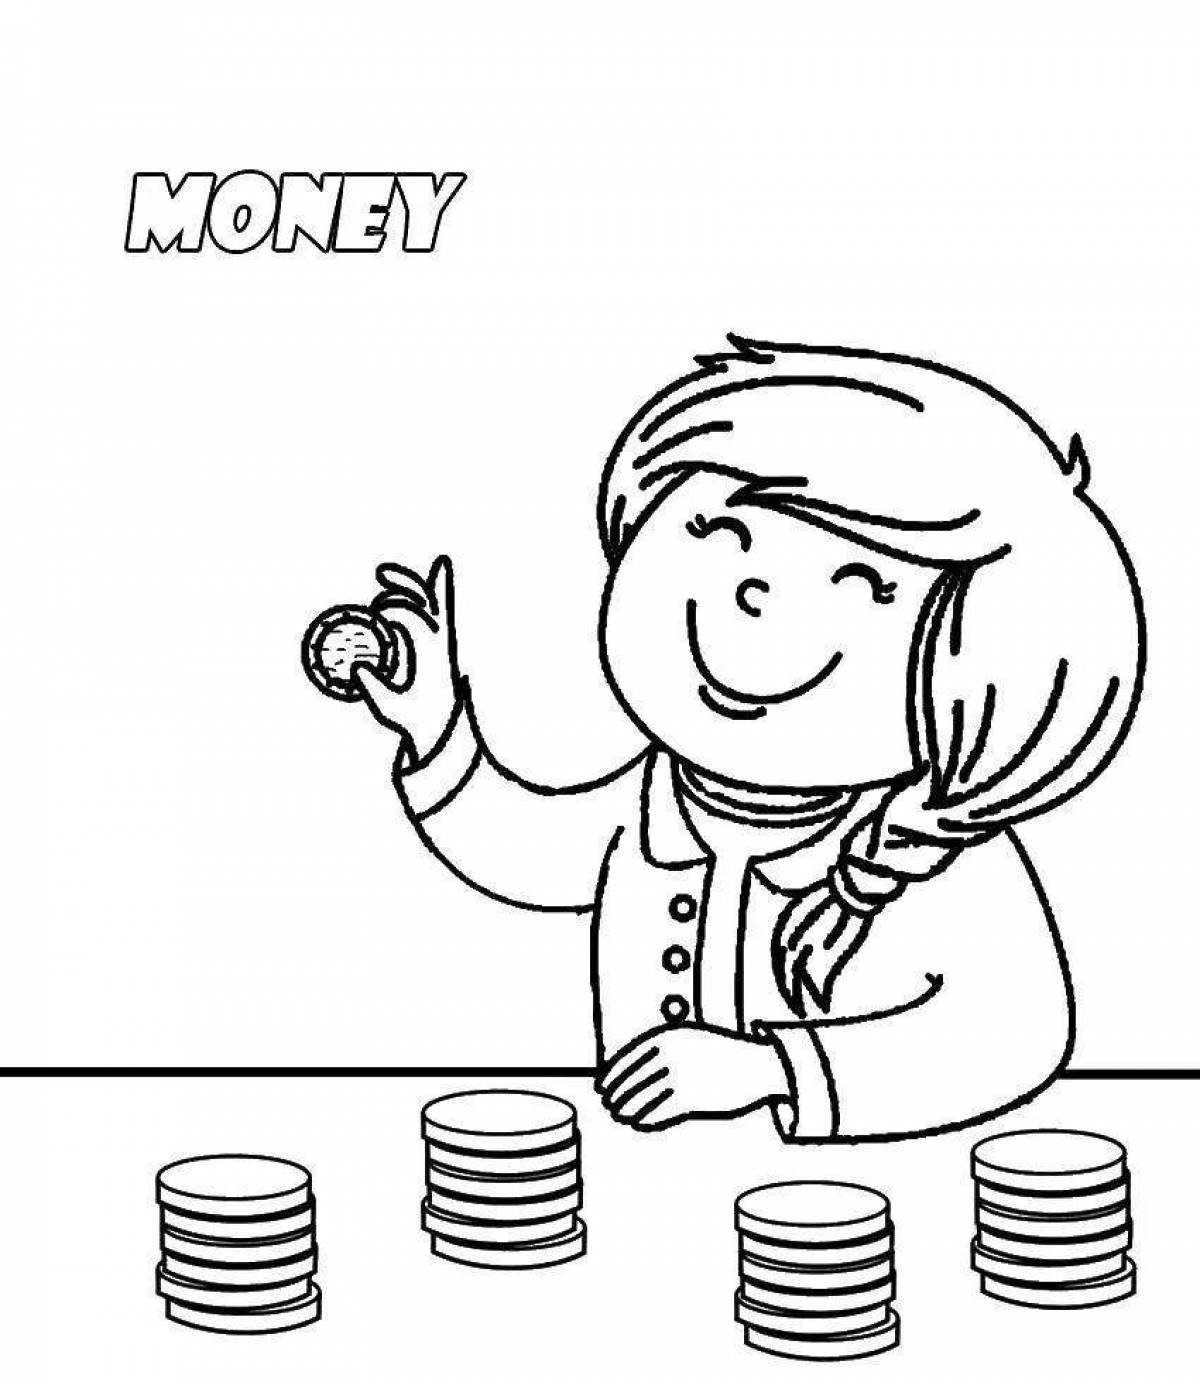 Creative financial literacy coloring pages for kids